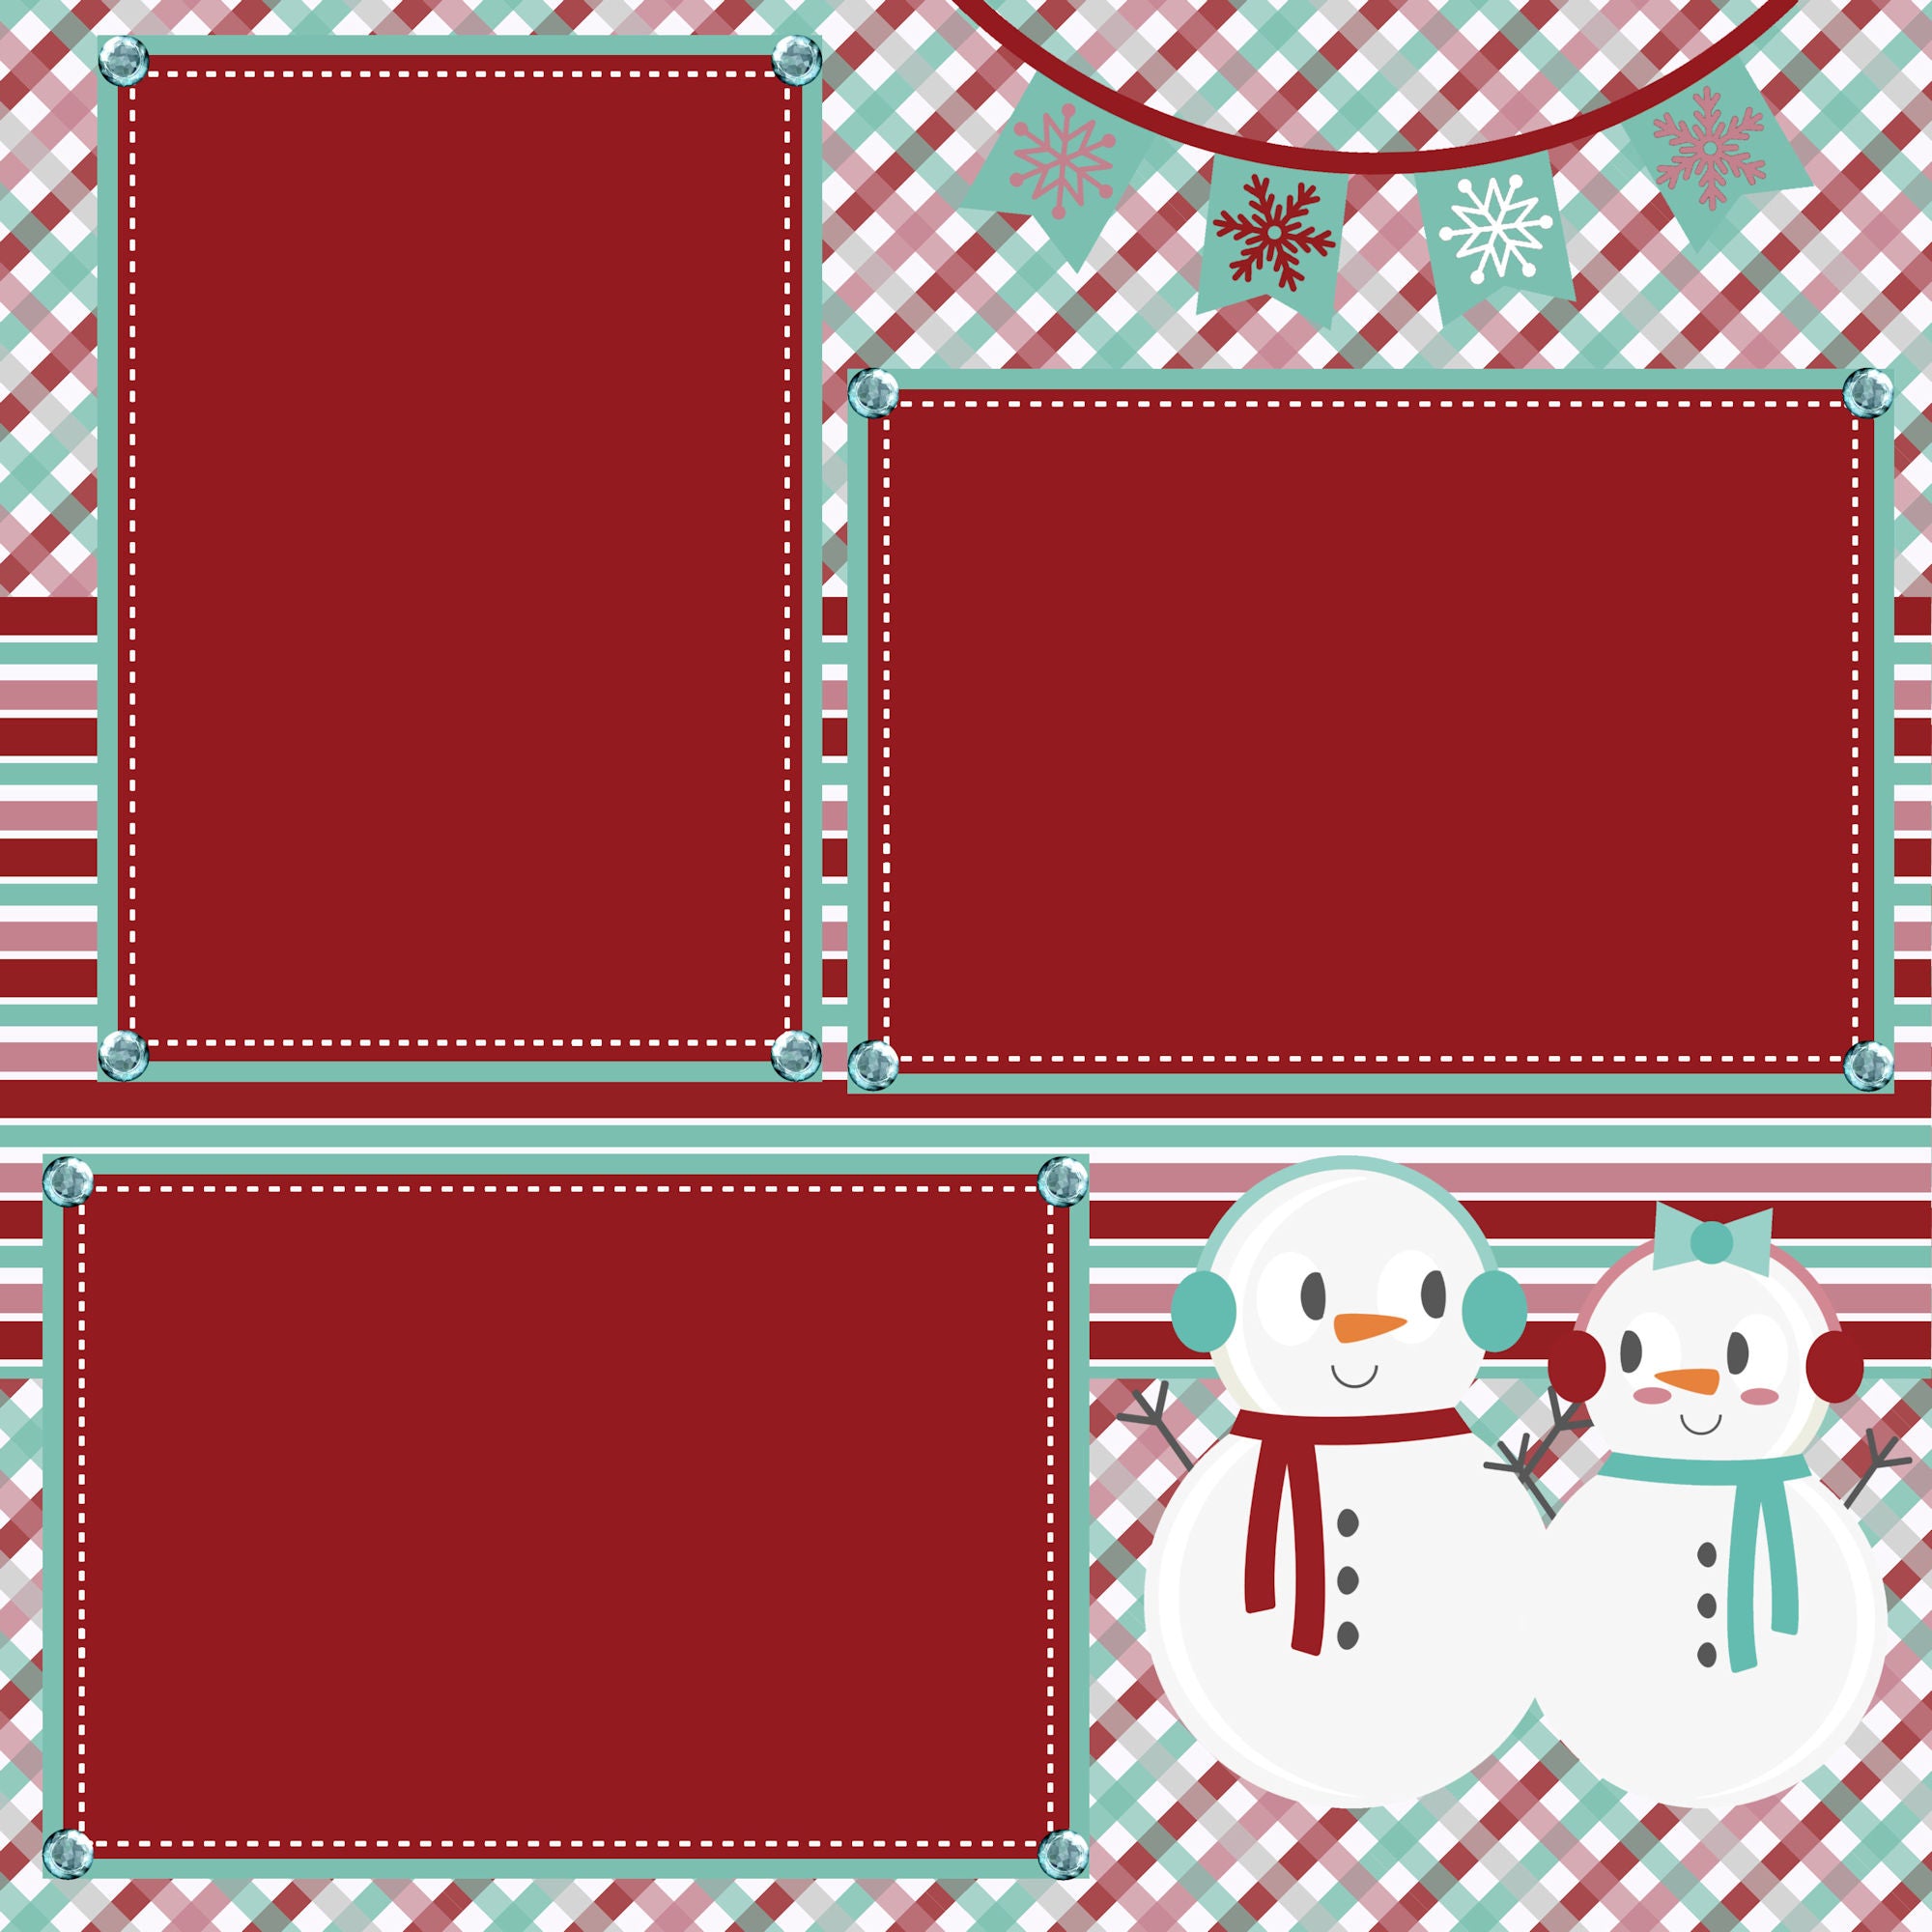 Let It Snow Cute Snow Family (2) - 12 x 12 Printed Scrapbook Pages by SSC Designs